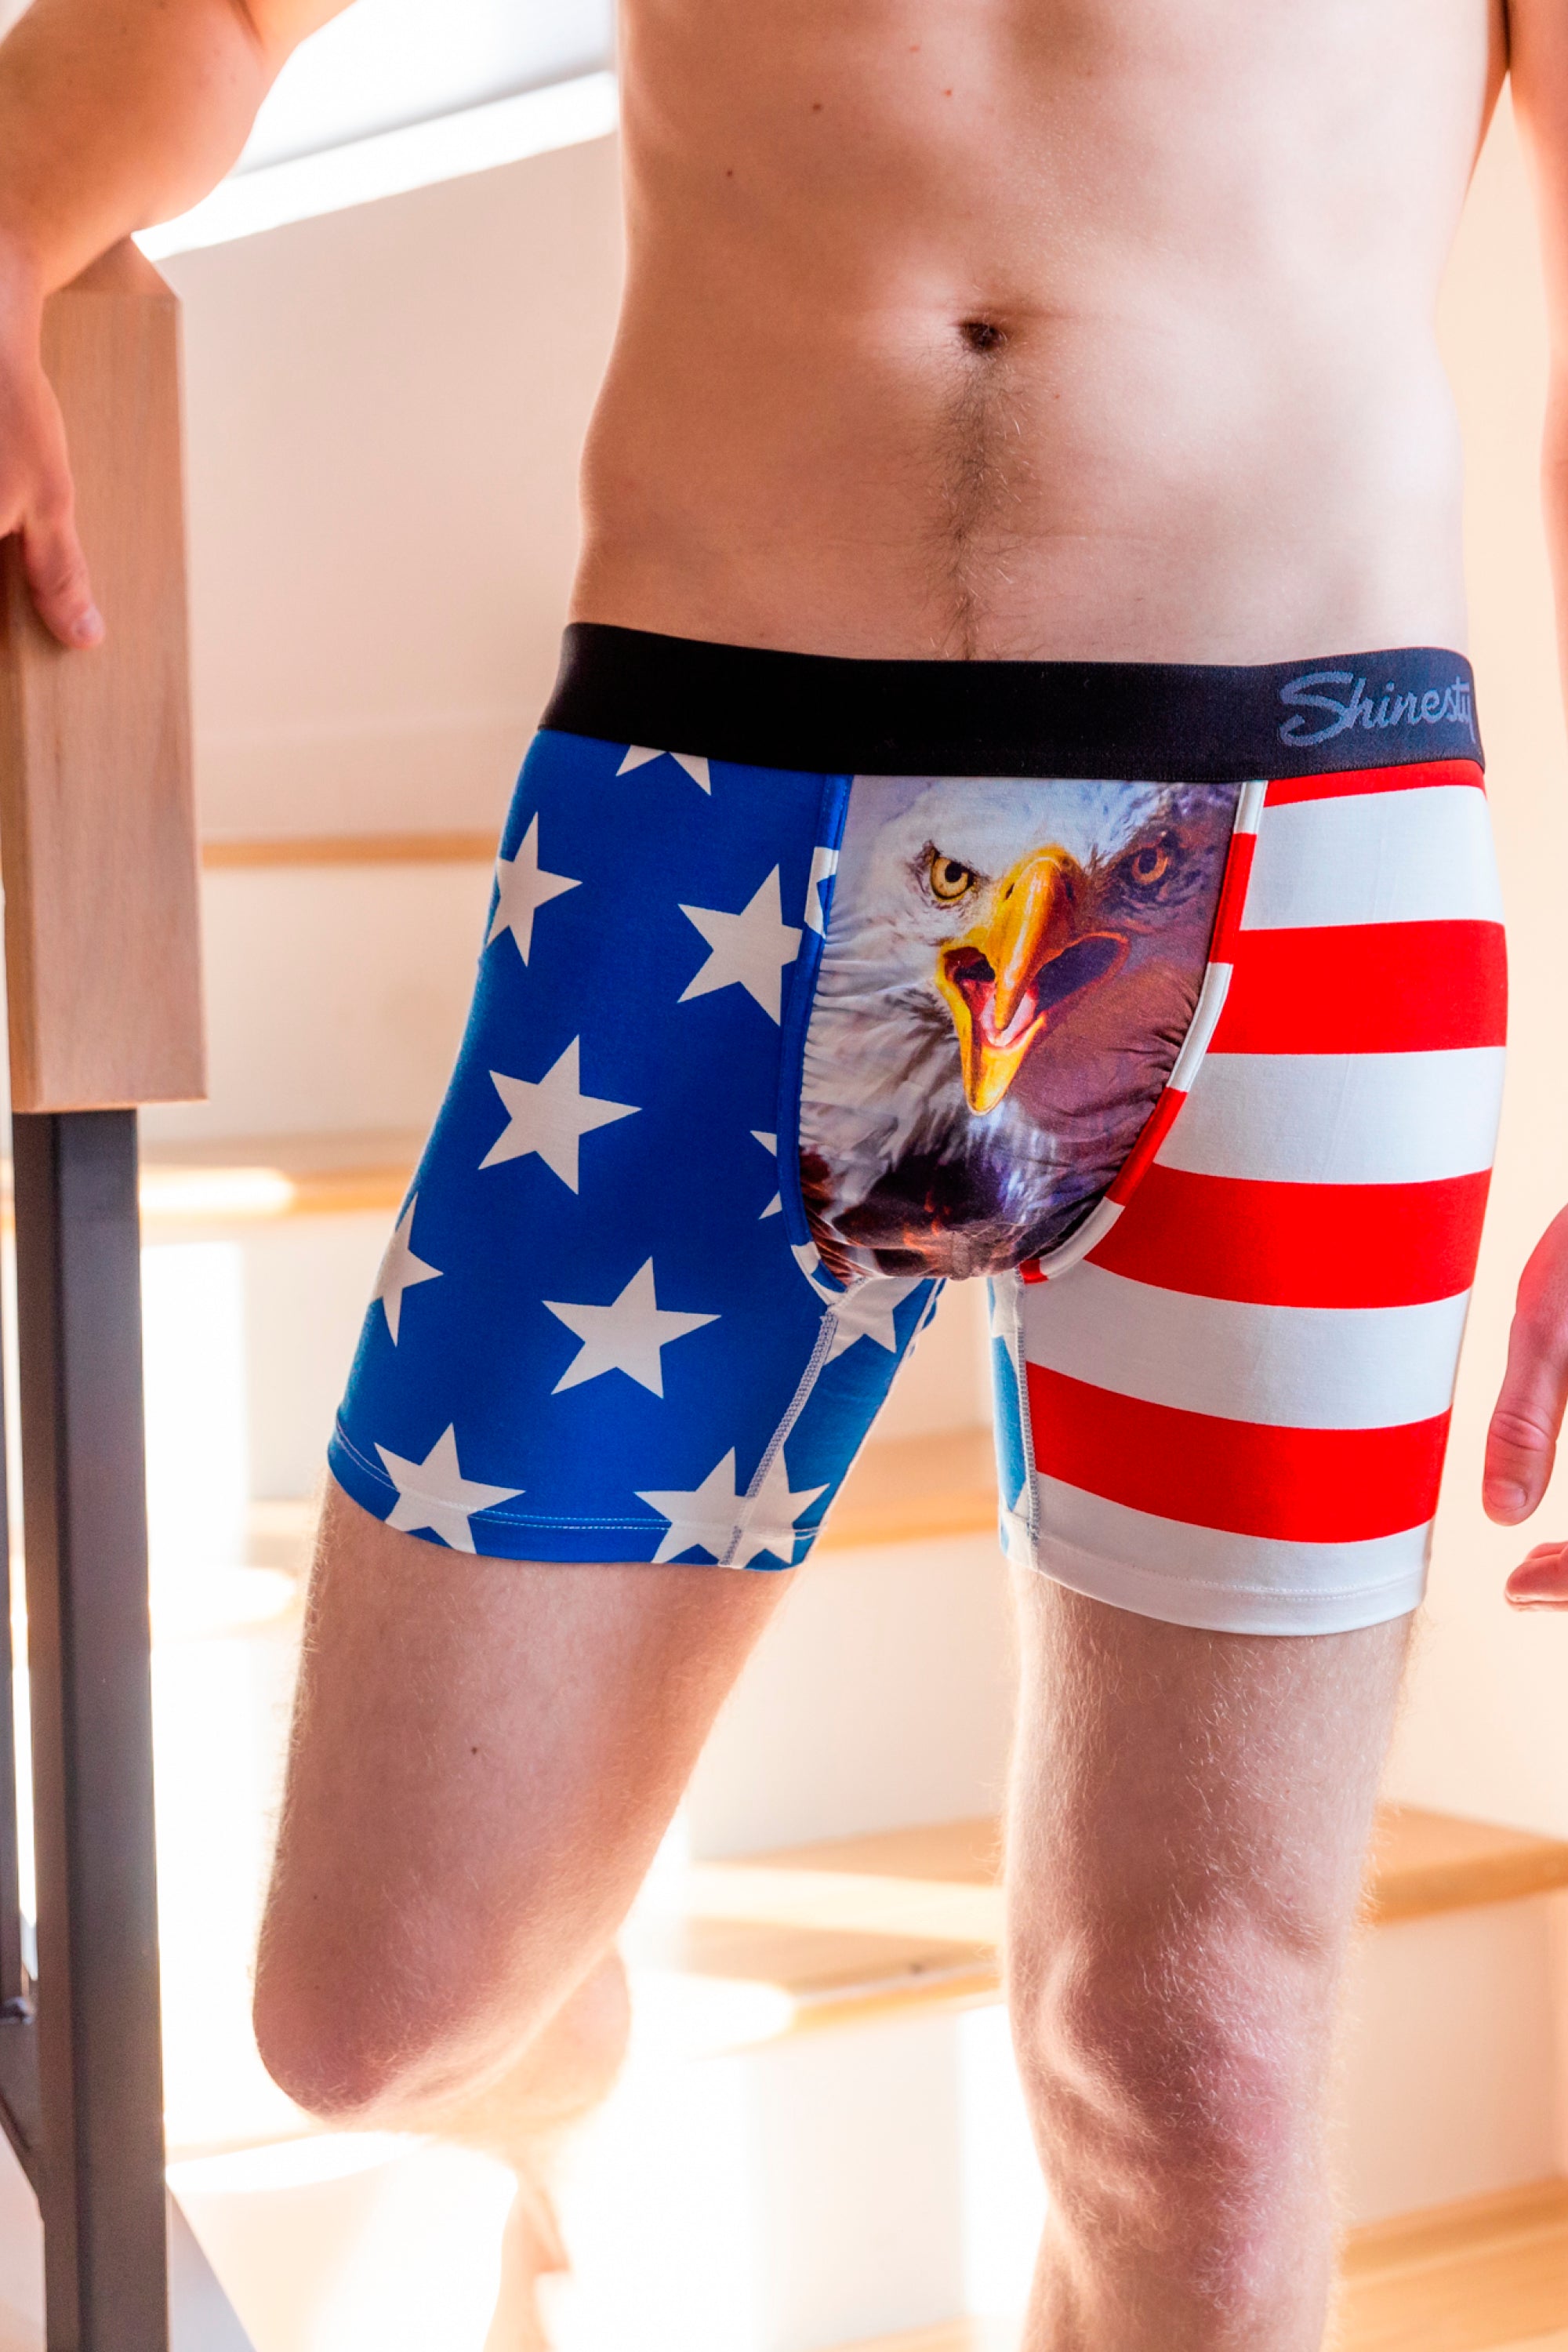 AMERICAN EAGLE STARS and STRIPES Boxer Brief Underwear and just $8.97! WOW!